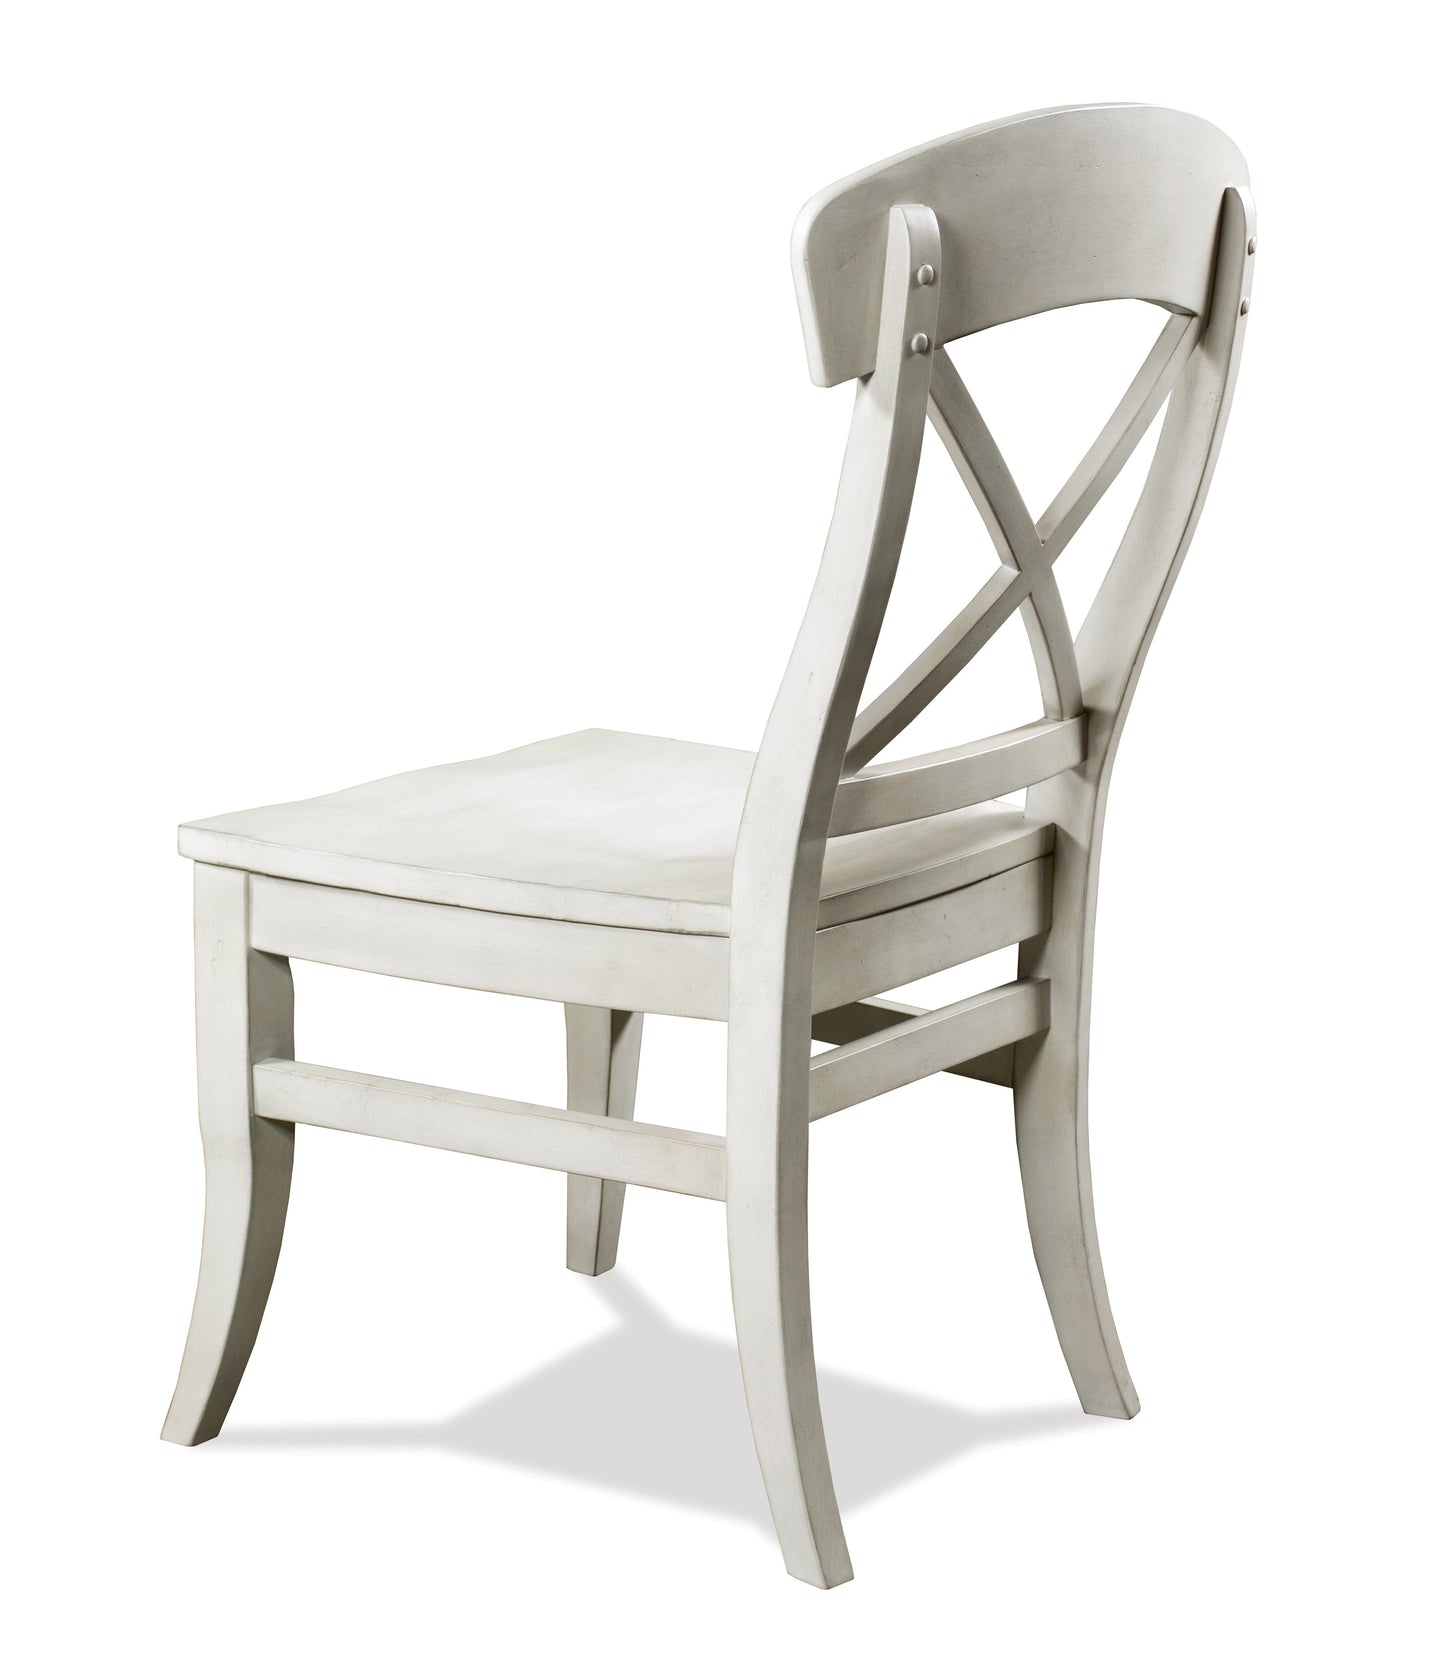 Roundhill Furniture Harola Cross-back Dining Side Chairs in Set of 2, Smoky White Finish